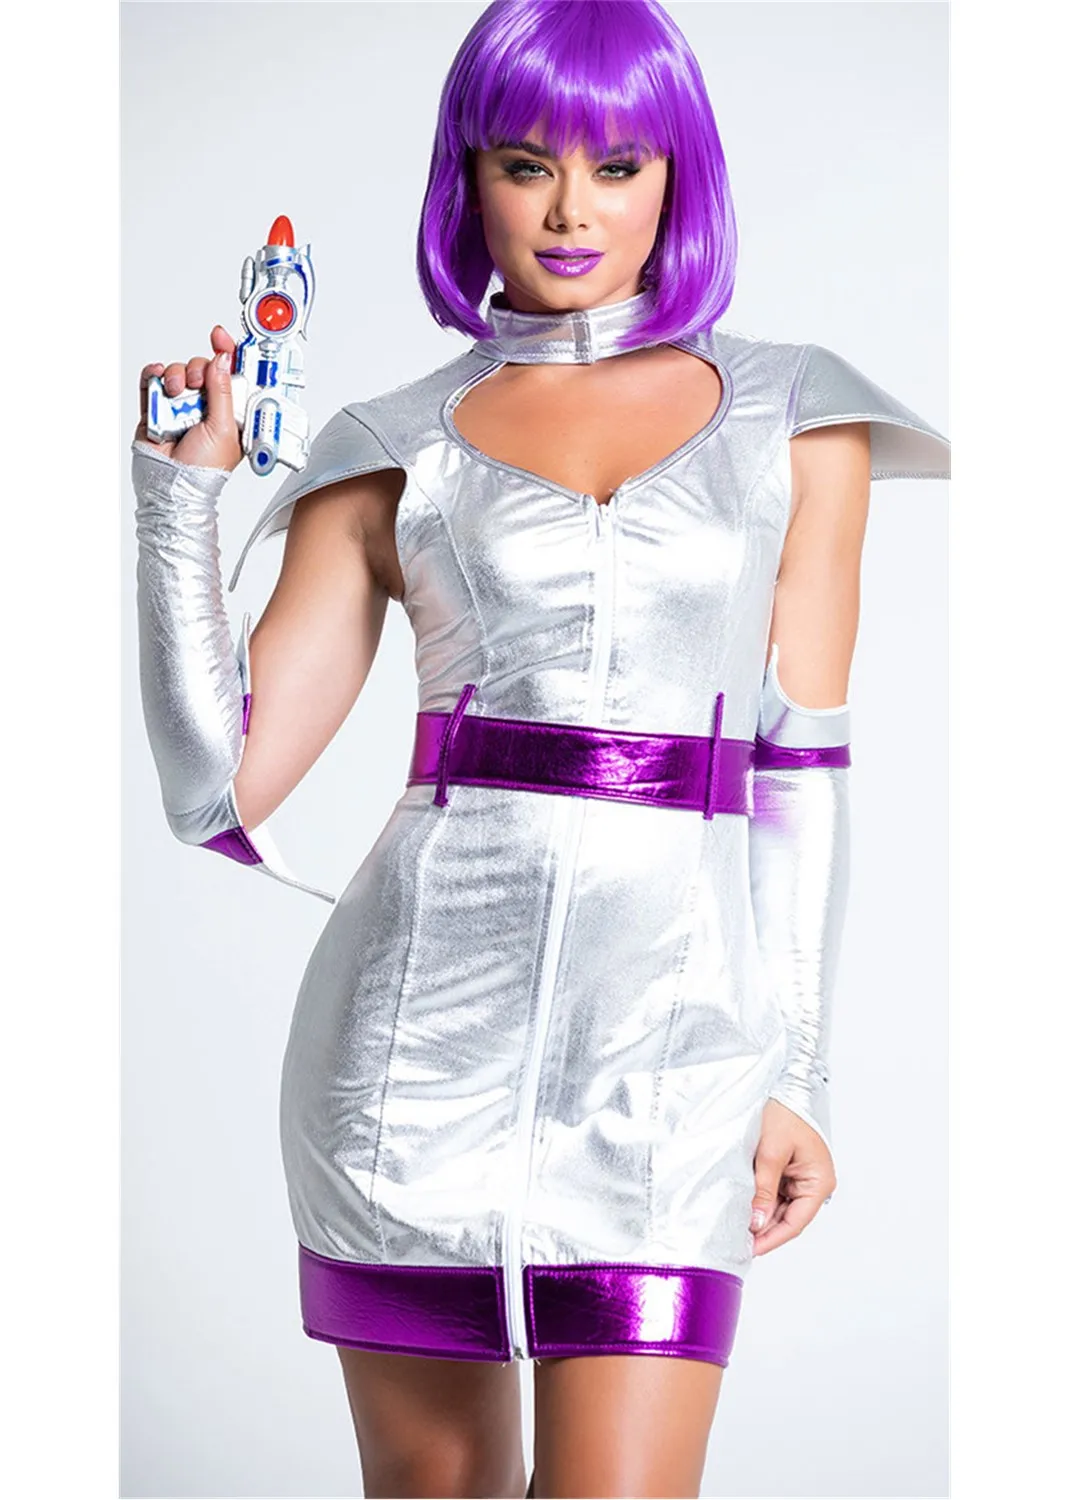 

Halloween Purim Space War Silver Soldier Woman Astronaut Pilot Cosplay Dress Carnival Party Tinman Fancy Costume